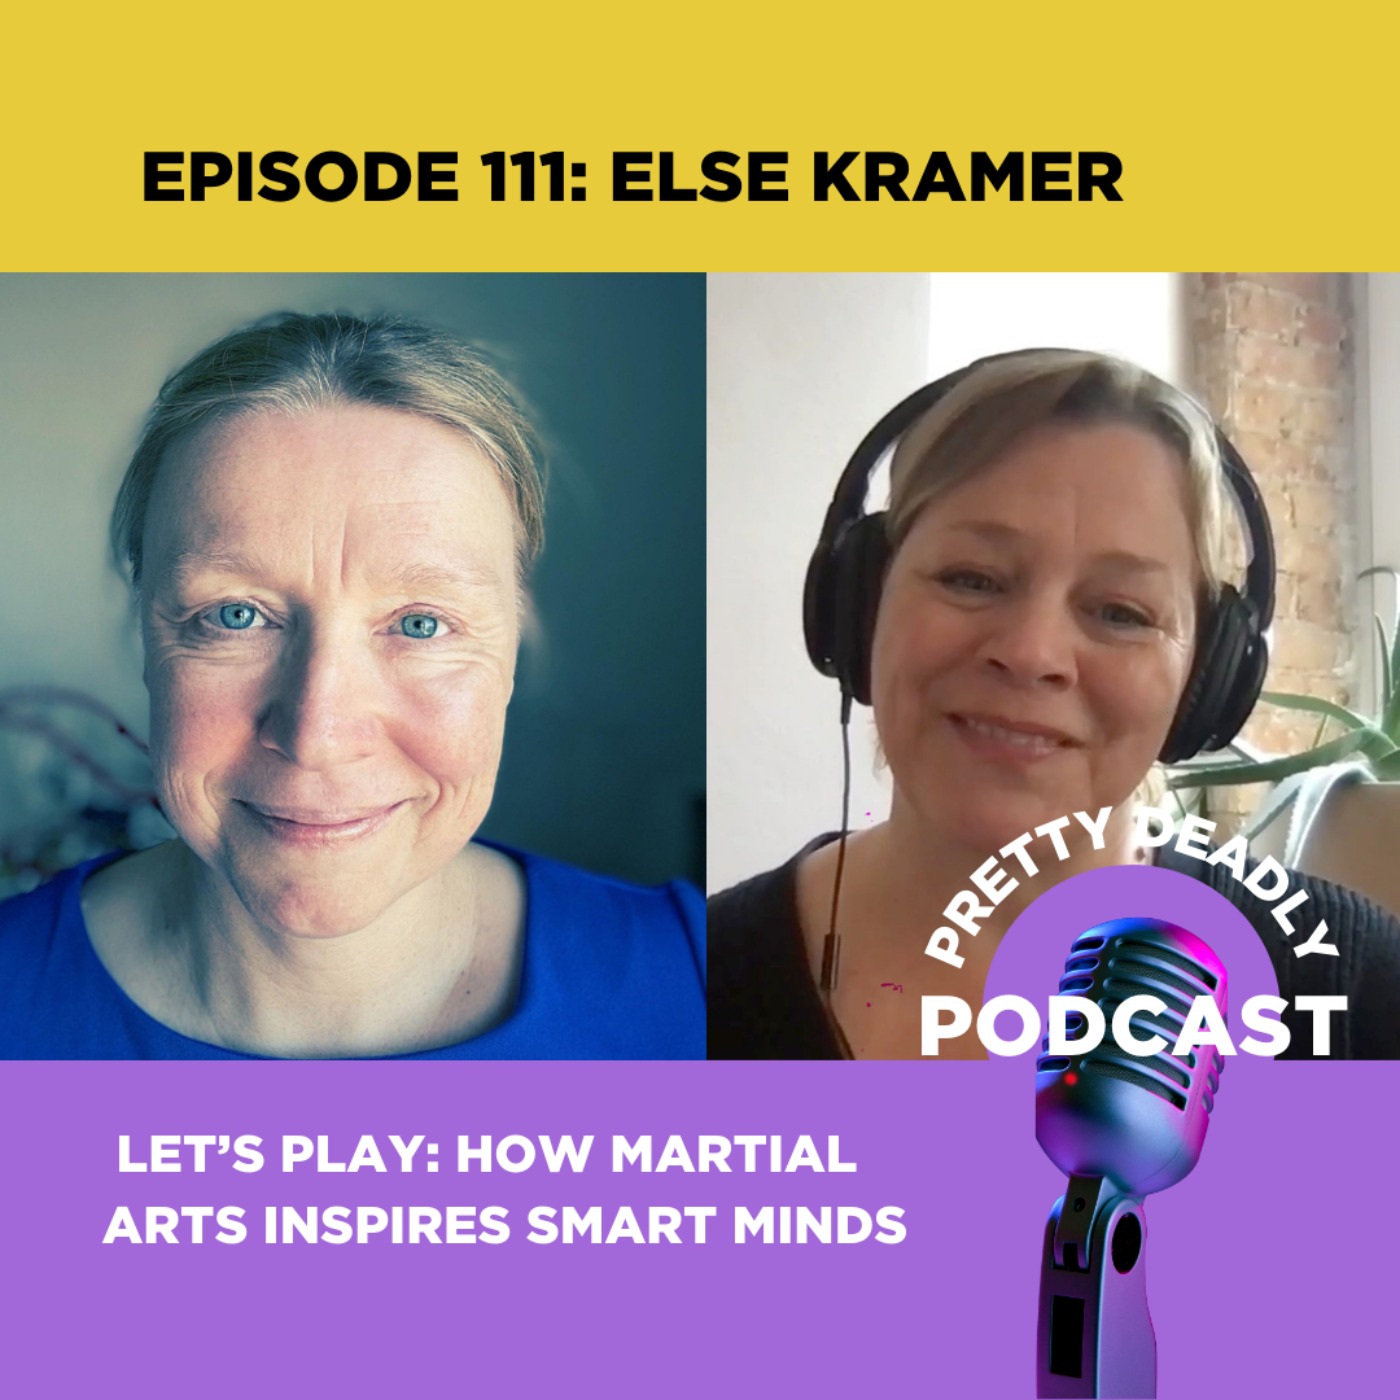 S7 Episode 111 - Let's Play: How Martial Arts Makes Smart Minds